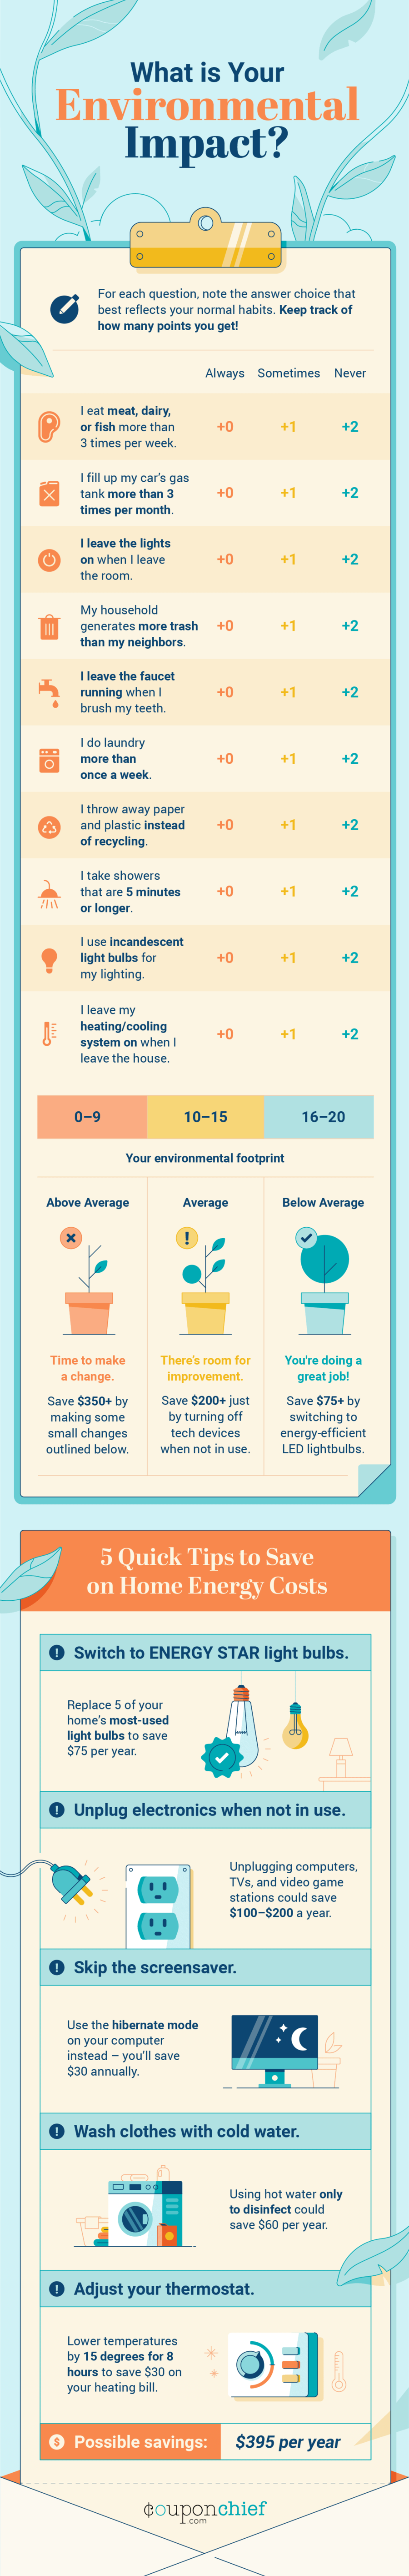 Infographic: What Is Your Environmental Impact?